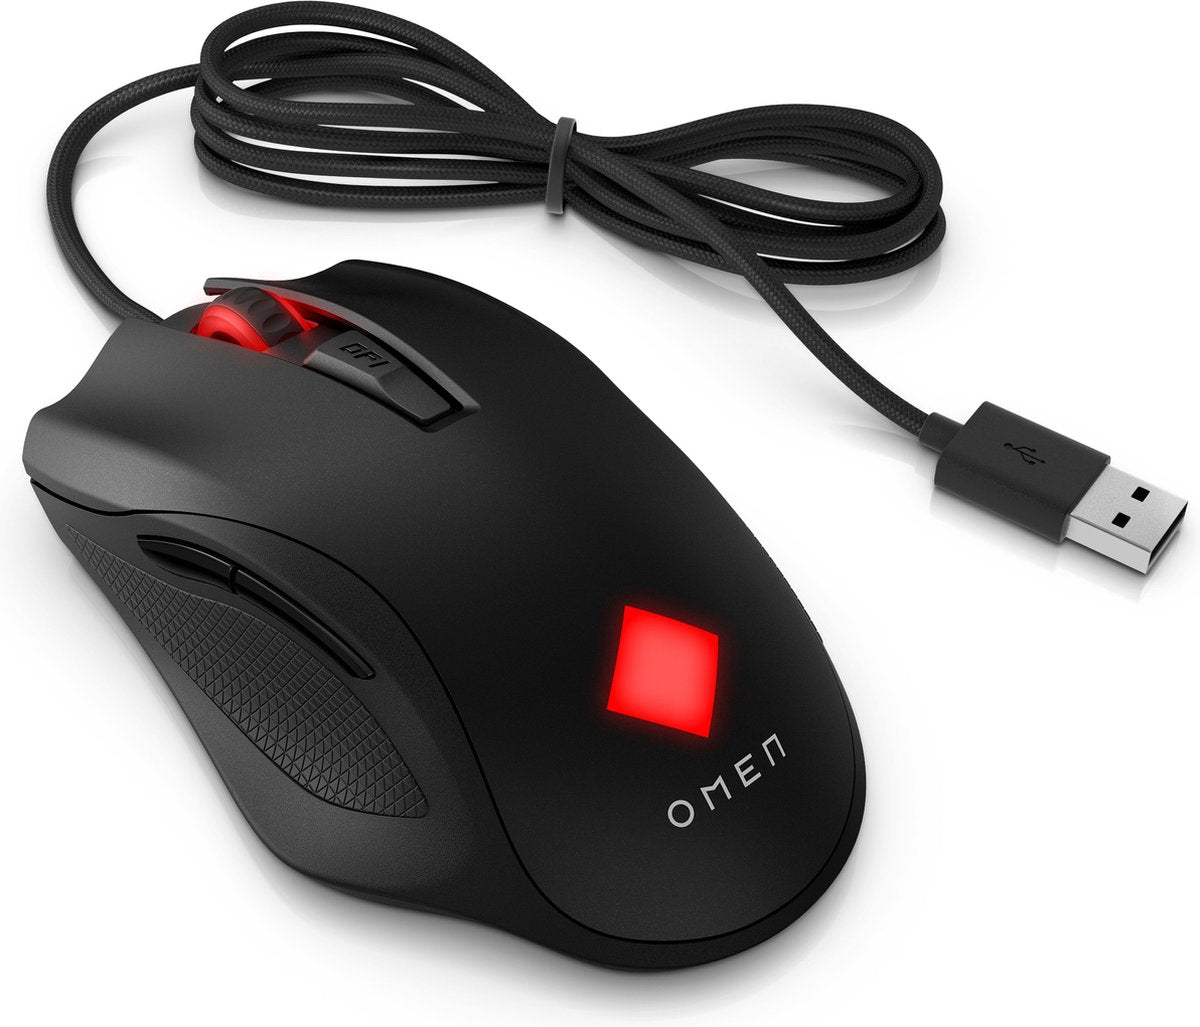 HP Omen vector gaming mouse